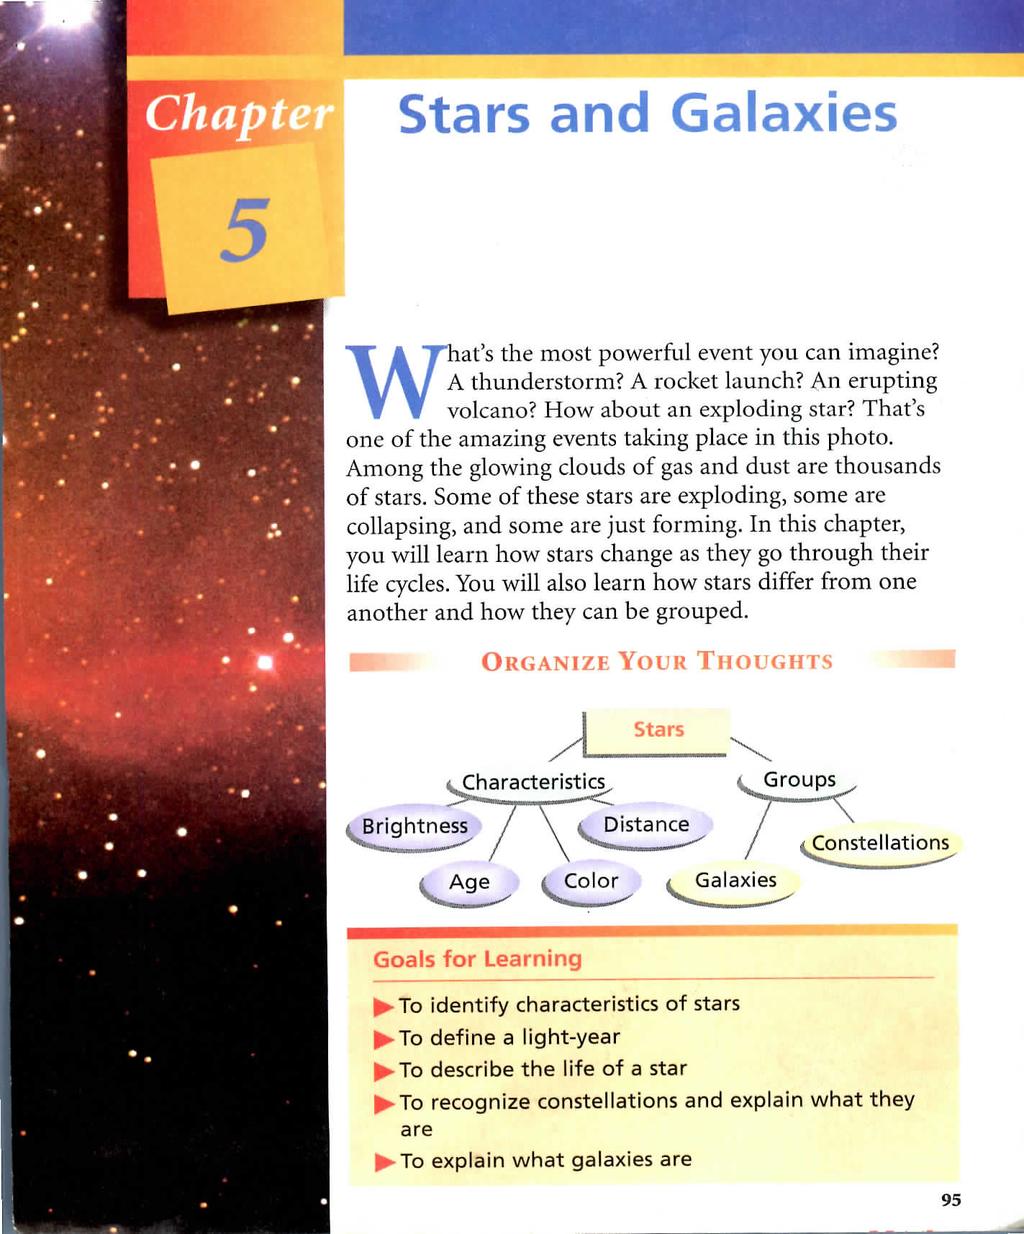 Cha Stars and Galaxies 5 "W Ttiat's the most powerful event you can imagine? k/%/ A thunderstorm? A rocket launch? An erupting volcano? How about an exploding star?